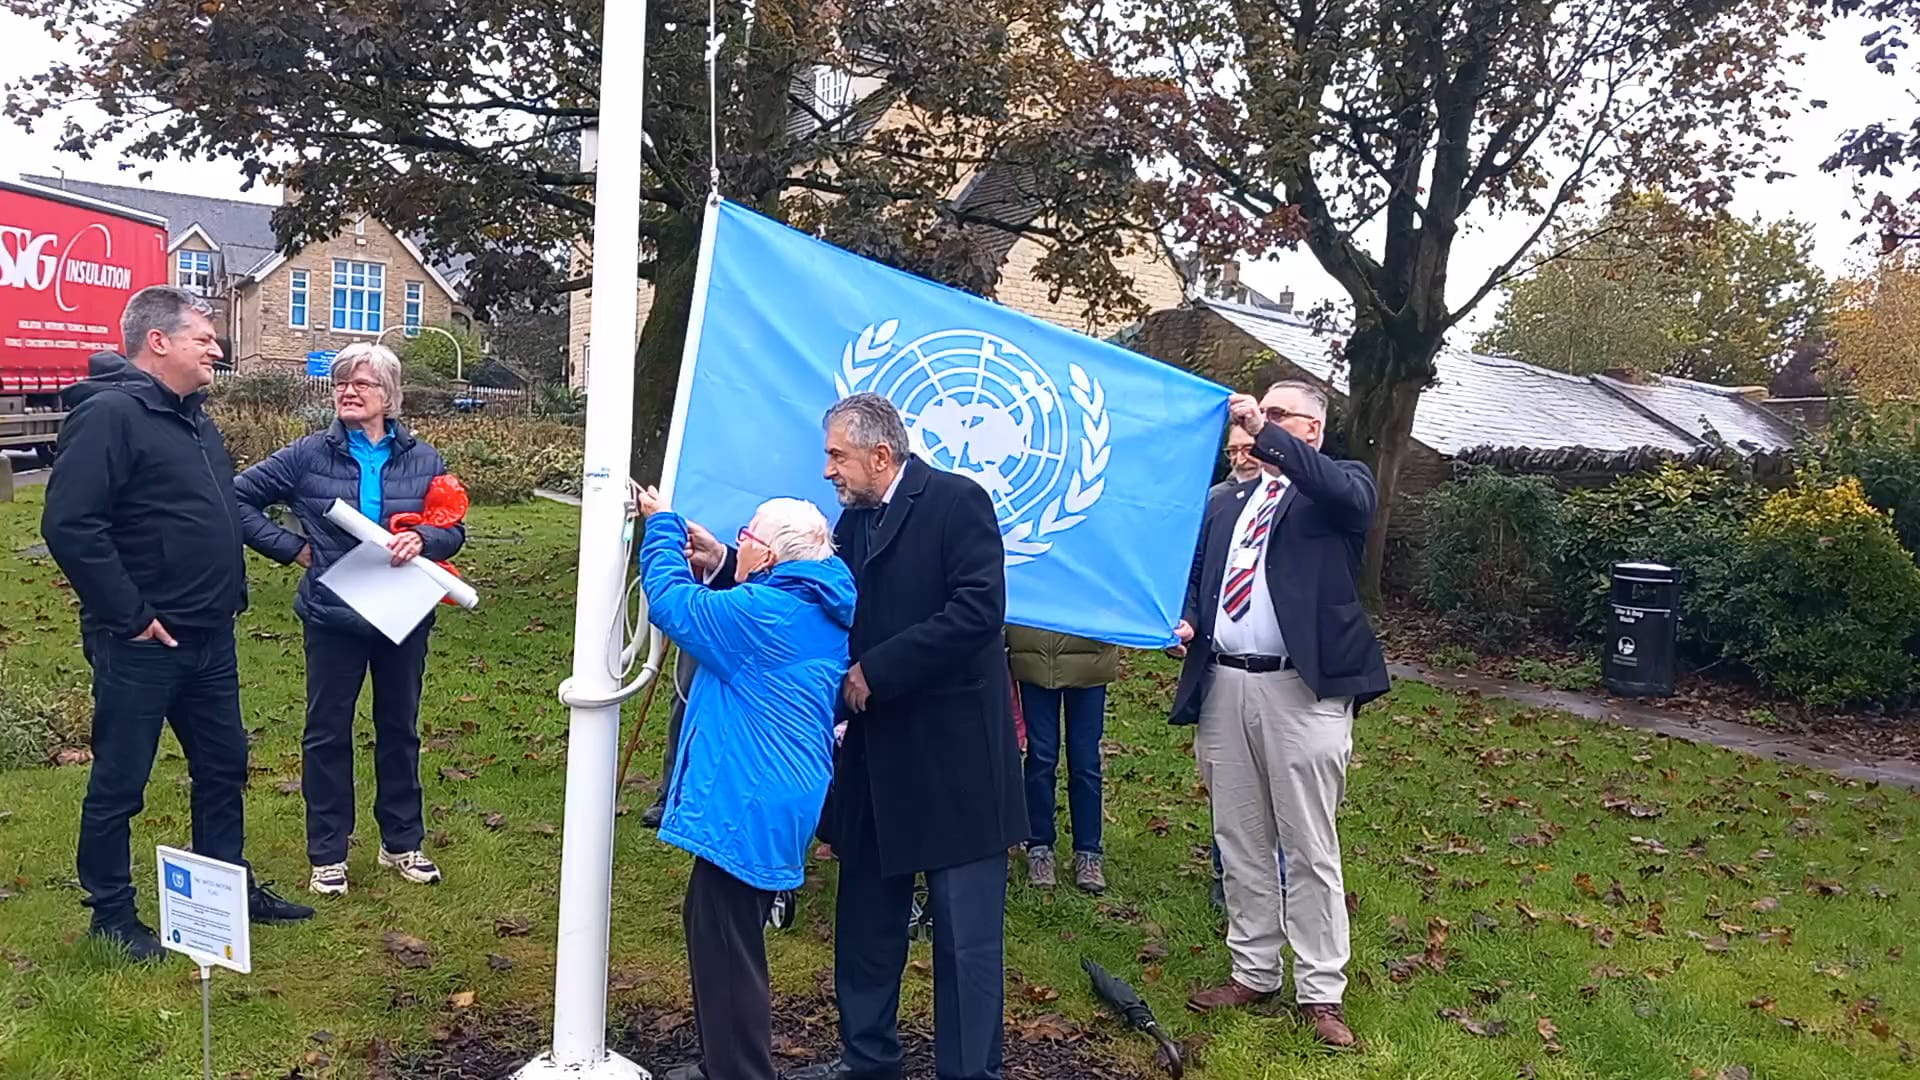 Members of Chipping Norton Amnesty and Chipping Norton Town Council raising the UN flag